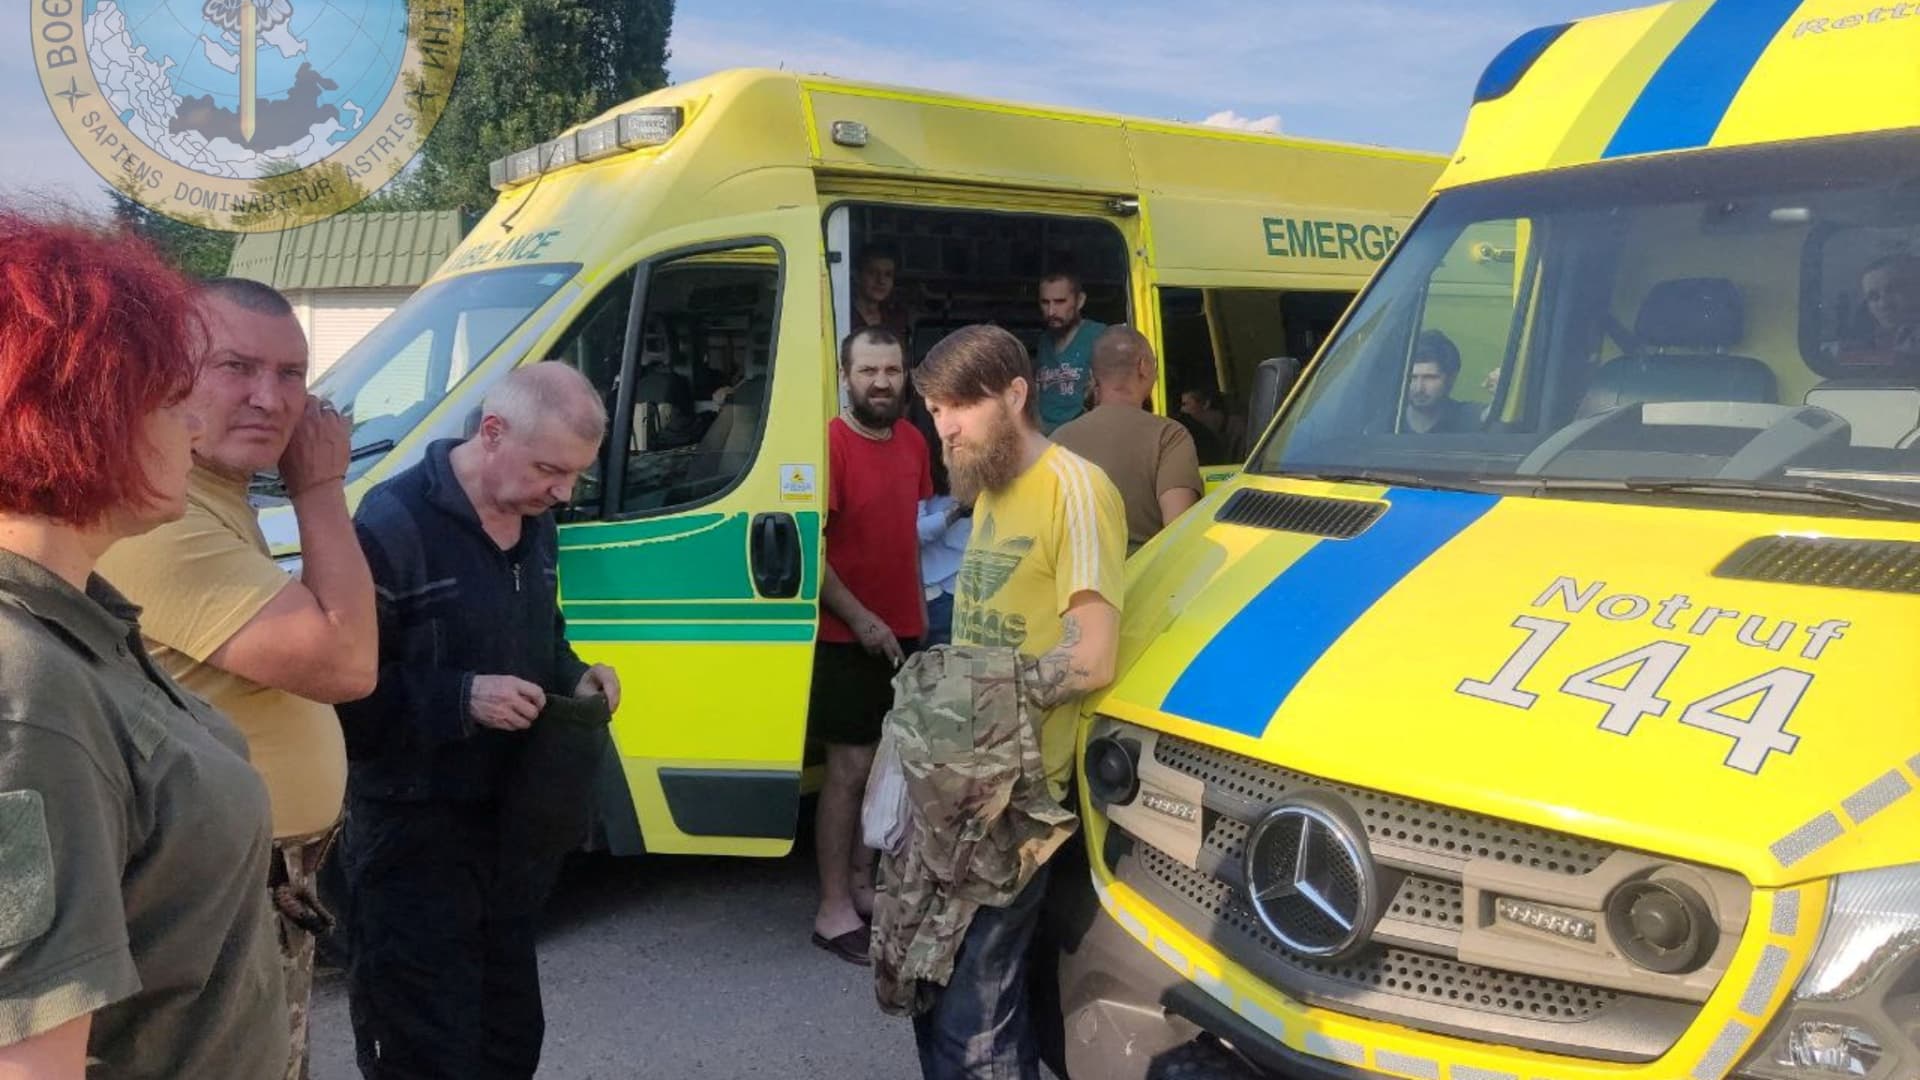 Ukrainian soldiers stand next to ambulances as Ukraine carries out an exchange of prisoners, amid Russia's invasion, at a location given as Zaporizhzhia region, Ukraine, in this handout photo released on June 29, 2022.